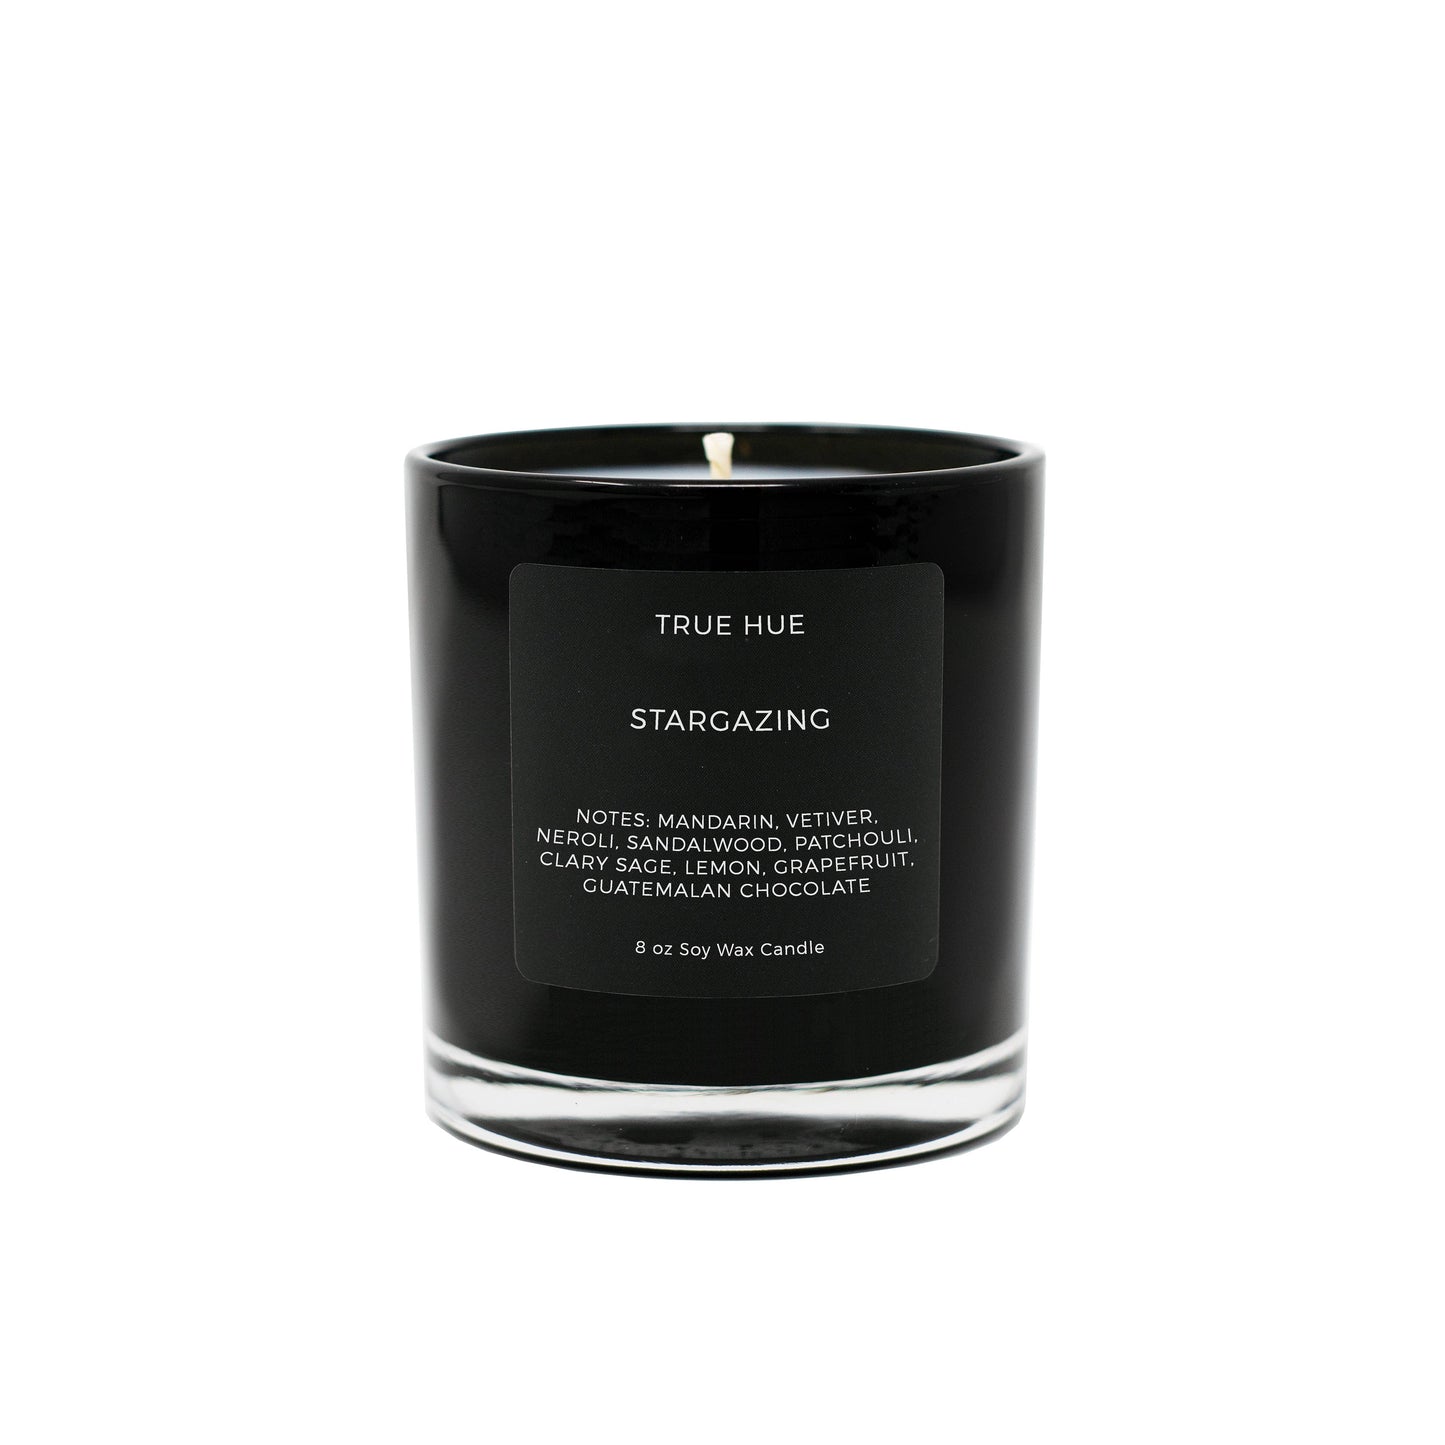 True Hue - Stargazing Soy Wax Candle